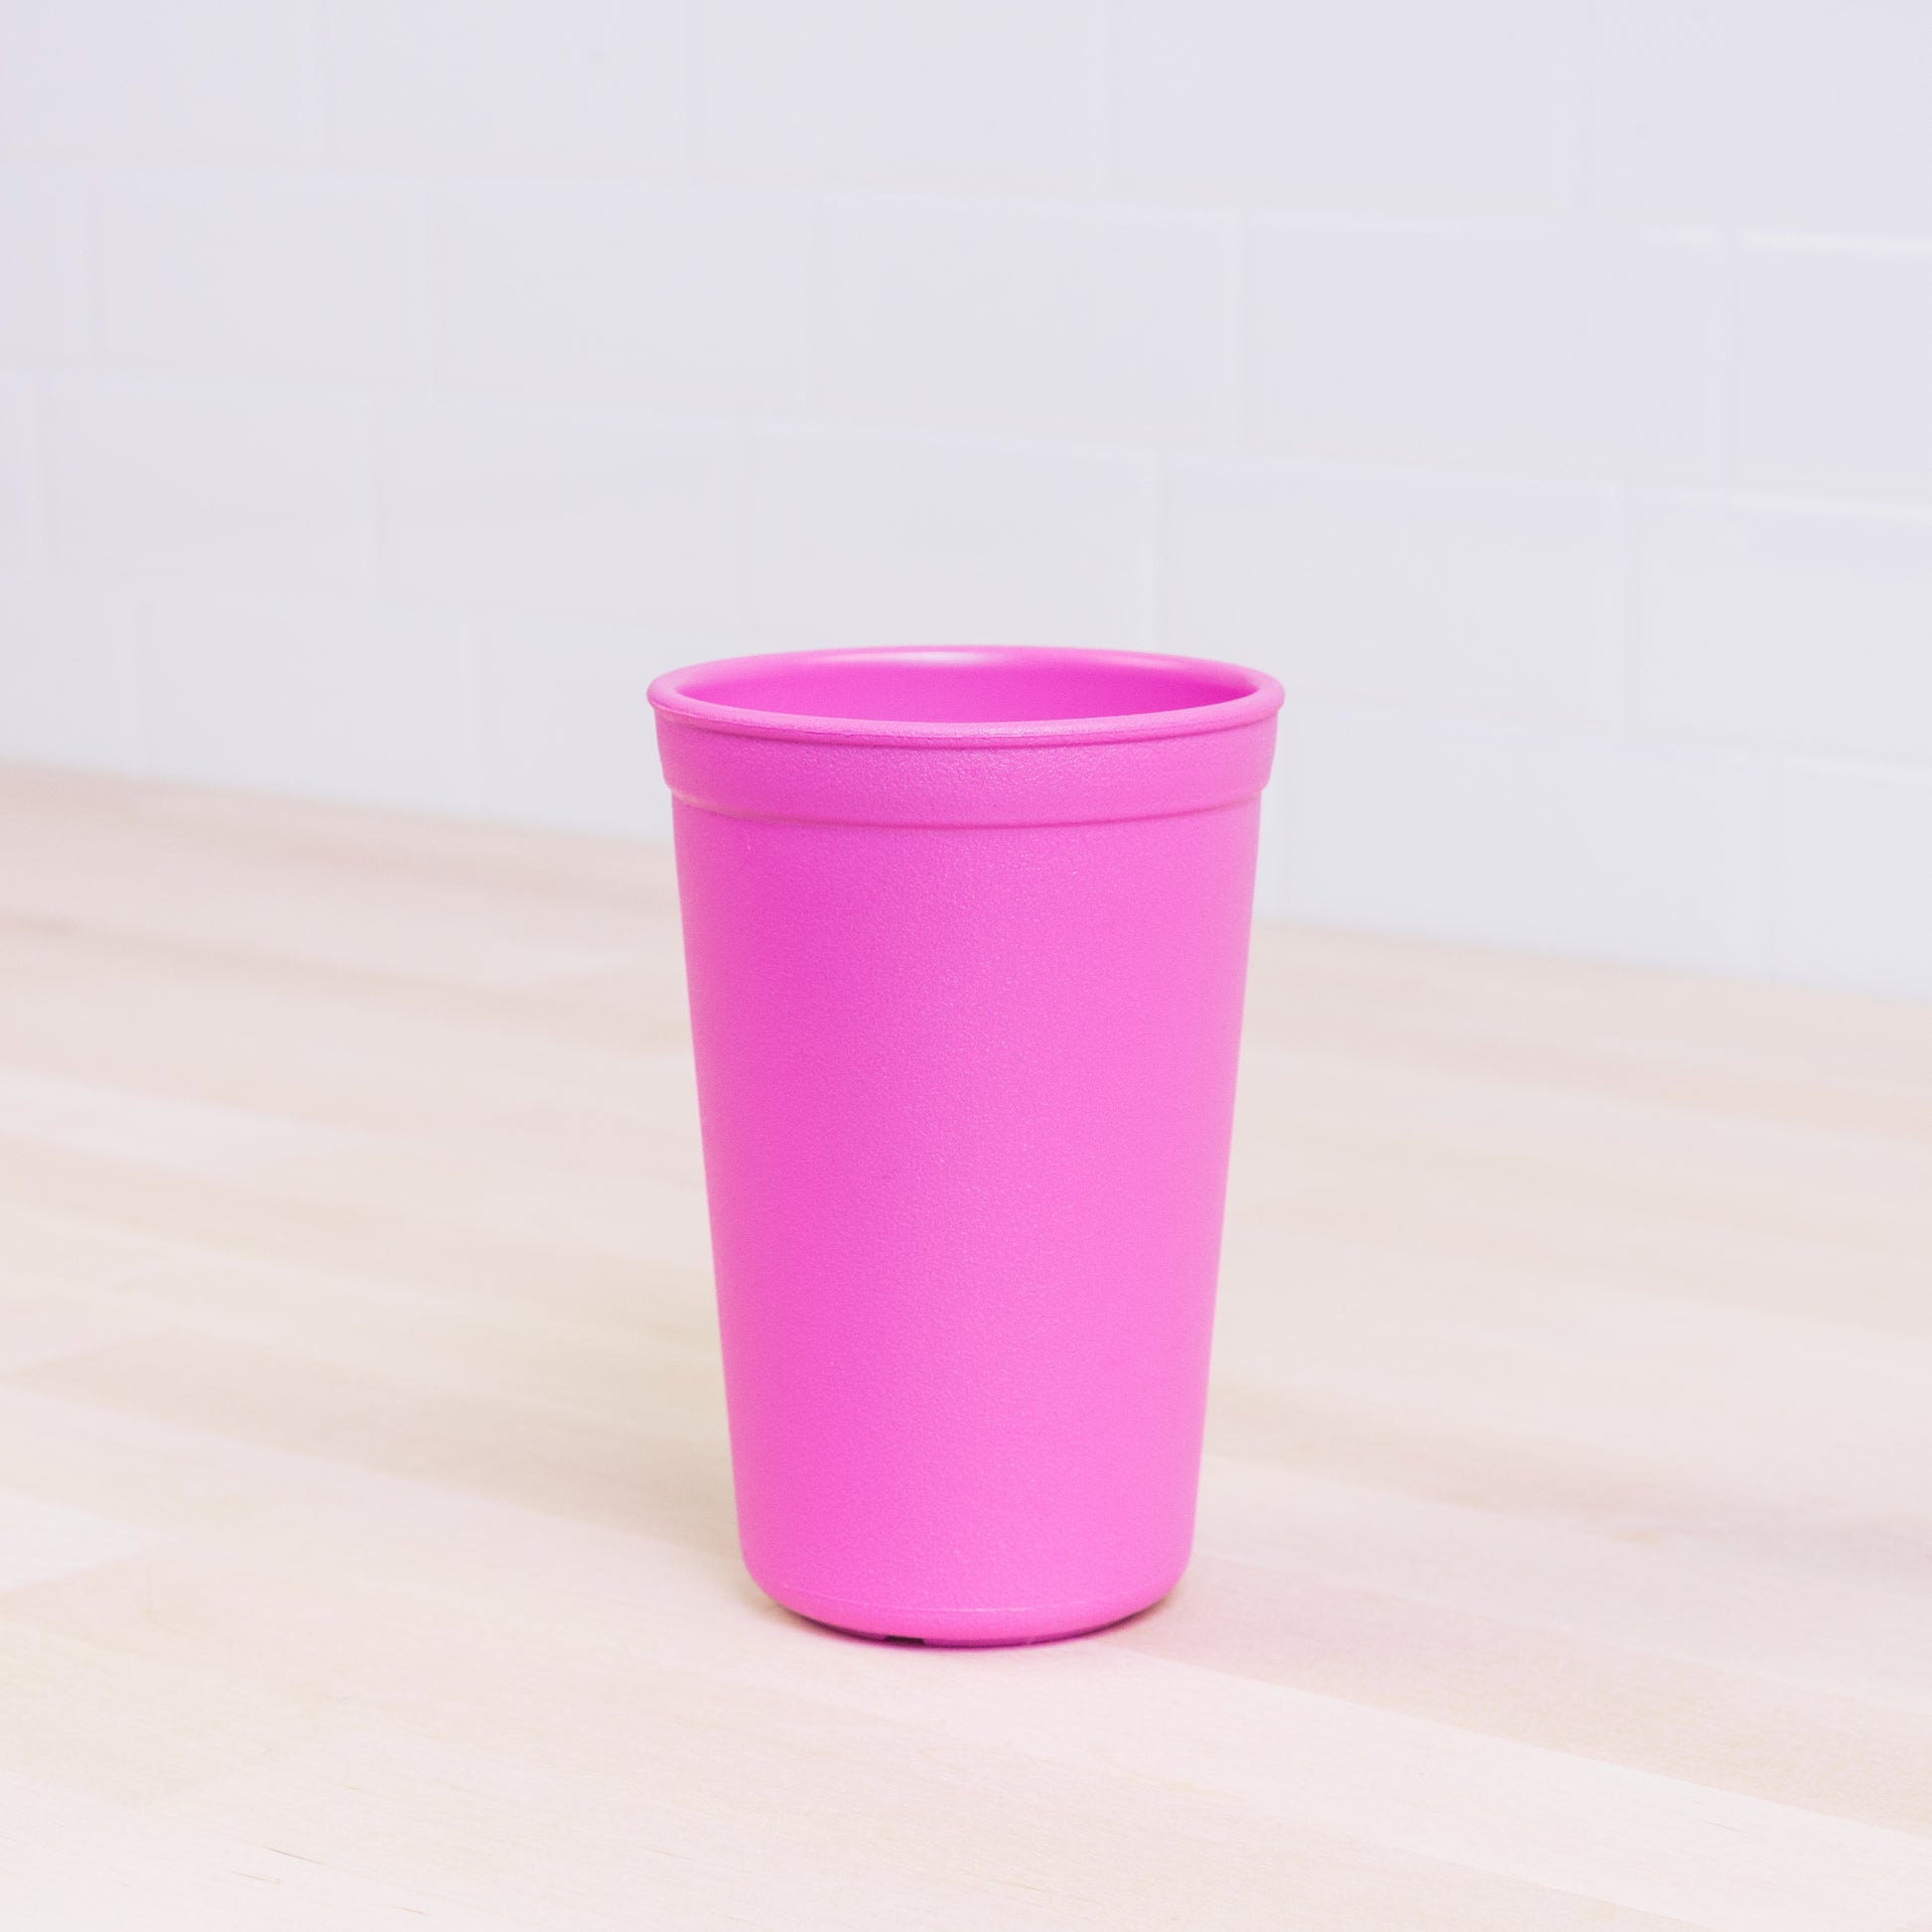 Re-Play Tumbler in Bright Pink from Bear & Moo